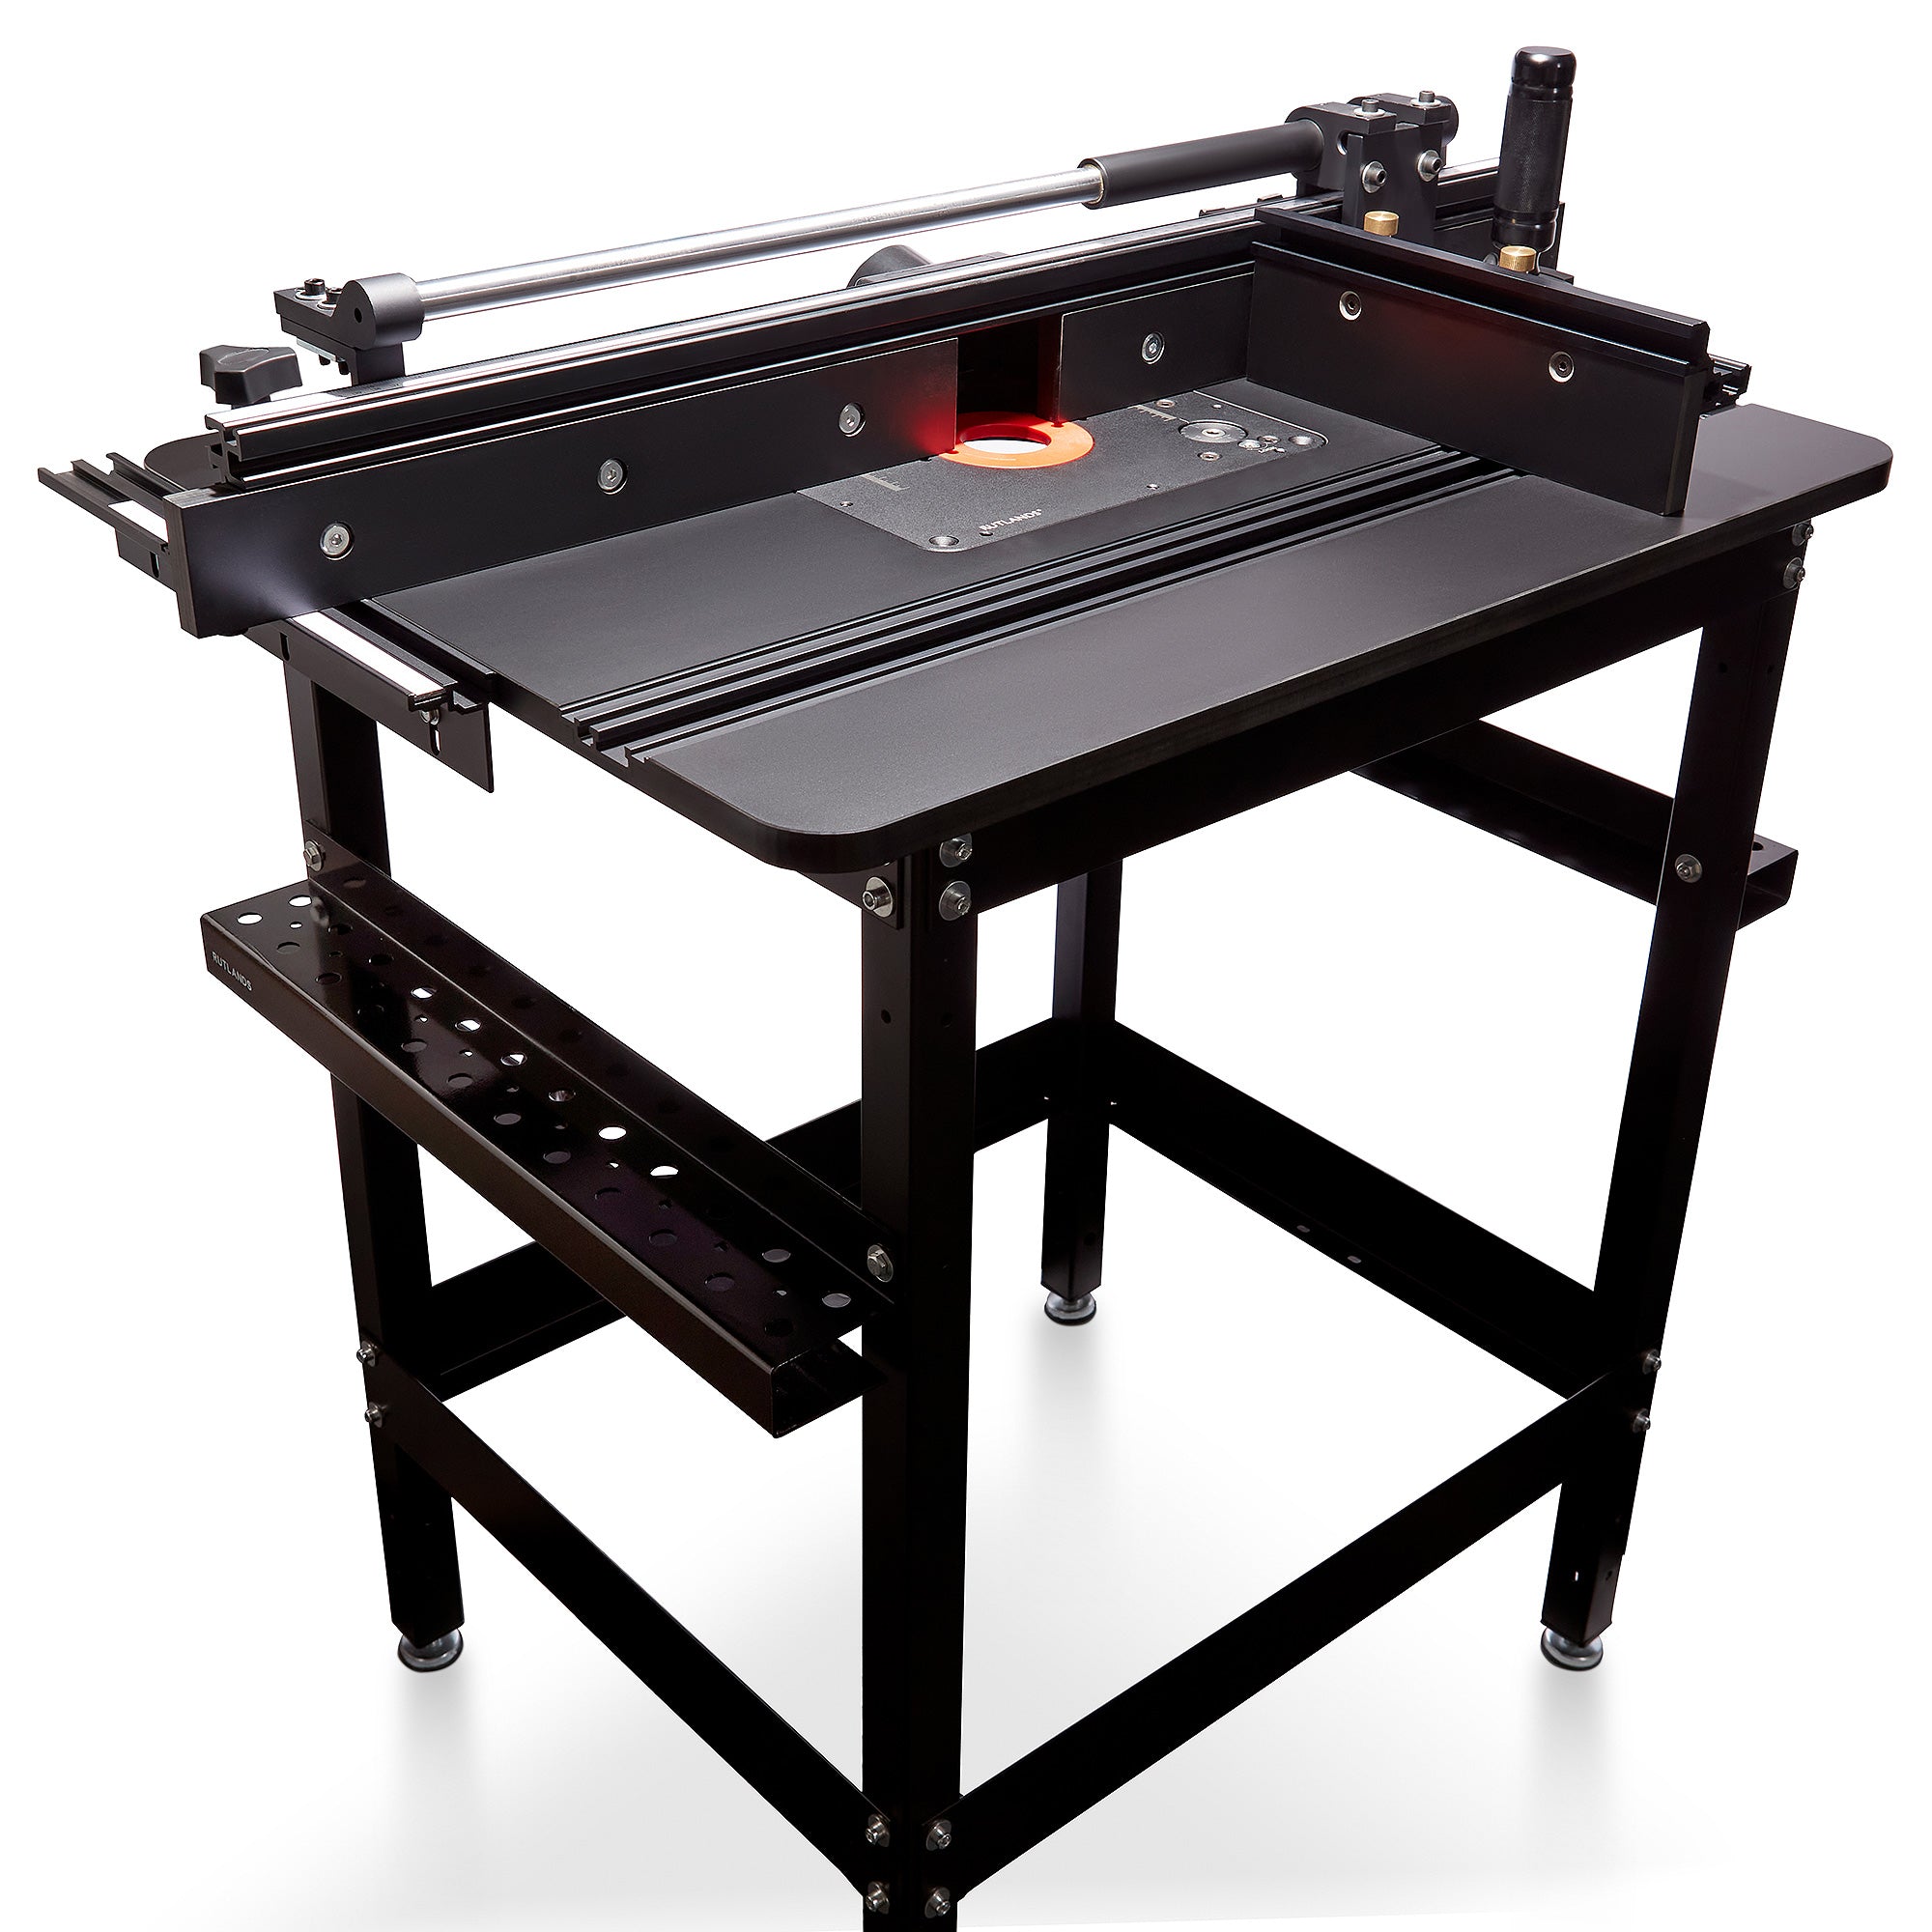 Phenolic Router Table Sliding Carriage